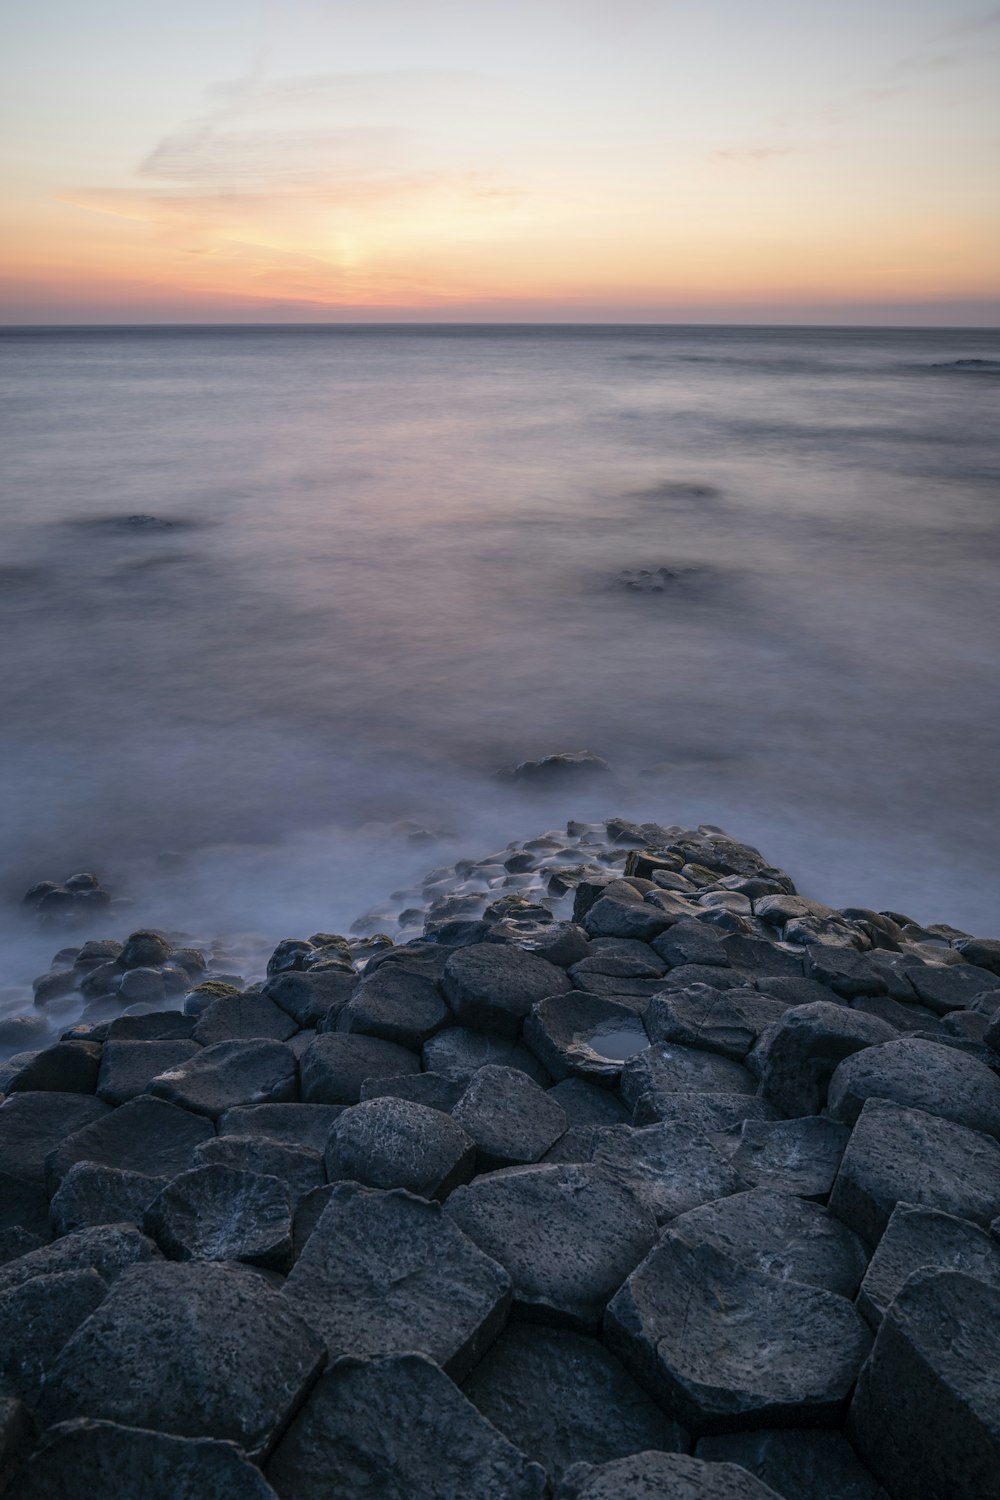 a rocky beach with rocks in the foreground and a sunset in the background